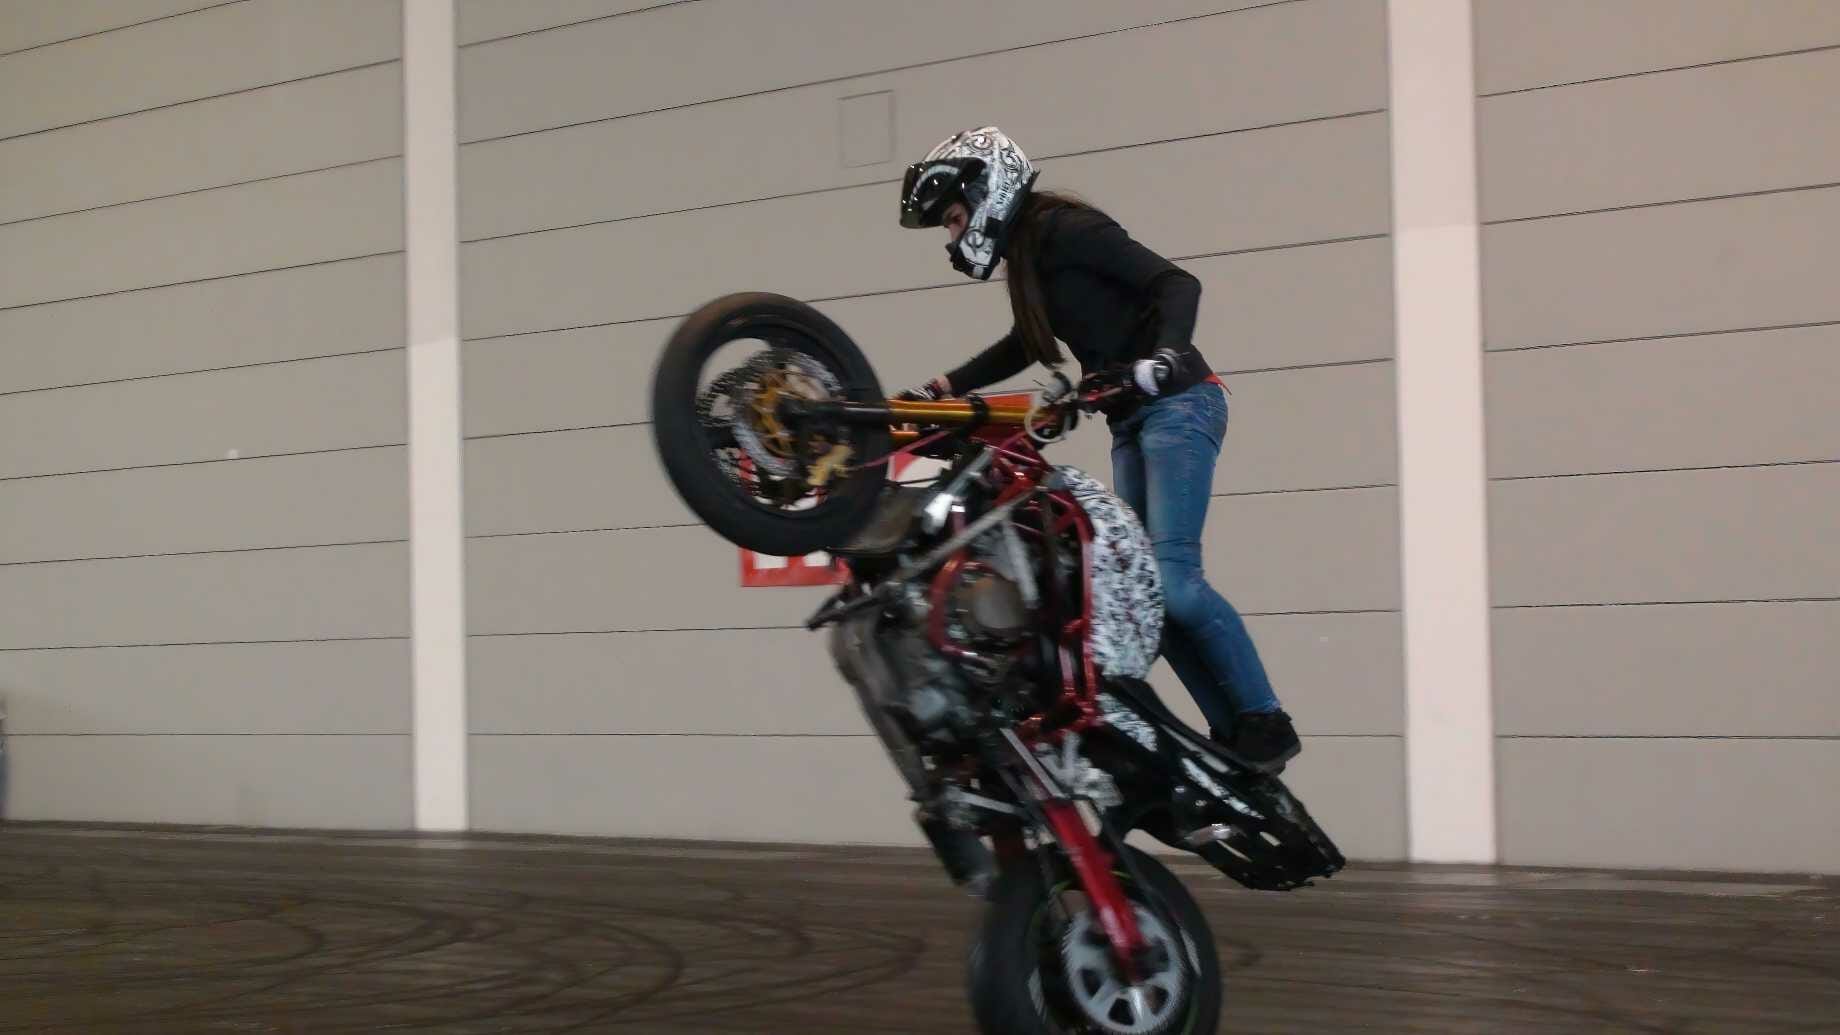 Stuntrider school for women only
- also in the MOTORCYCLES.NEWS APP